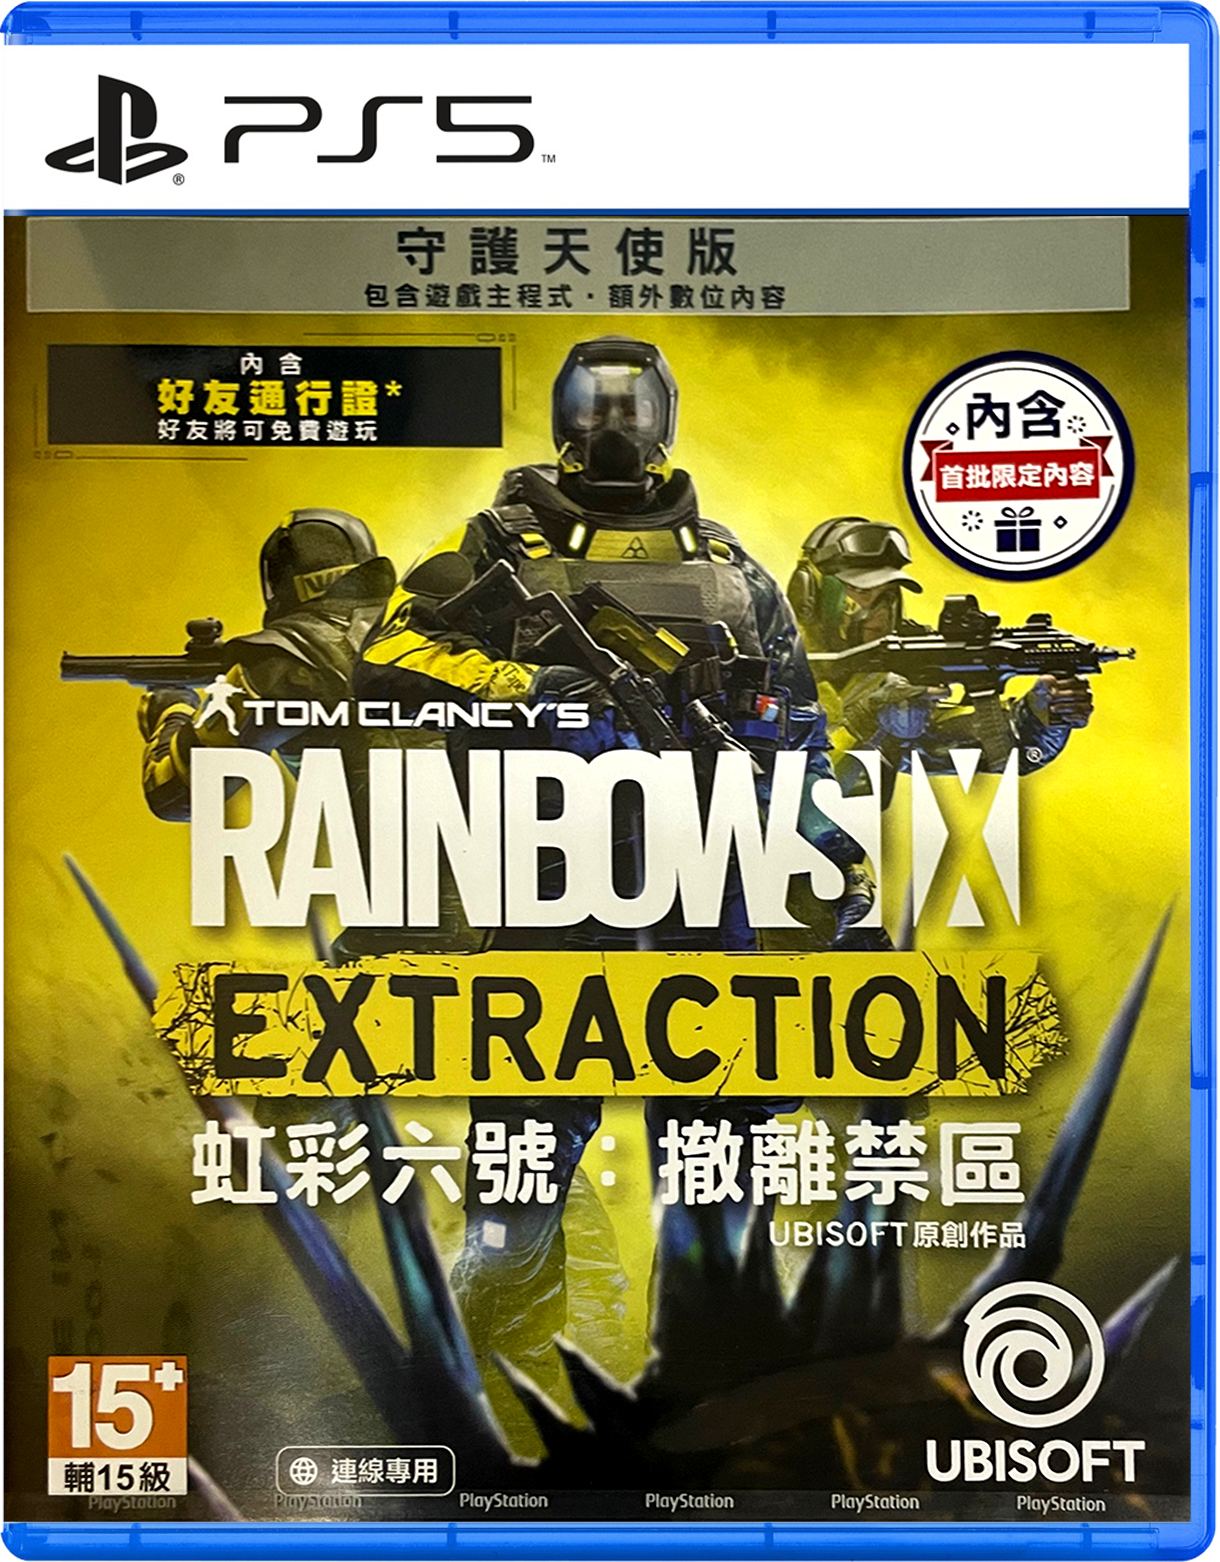 Tom Clancy\'s Rainbow PlayStation 5 for Edition] Six Extraction (English) [Guardian